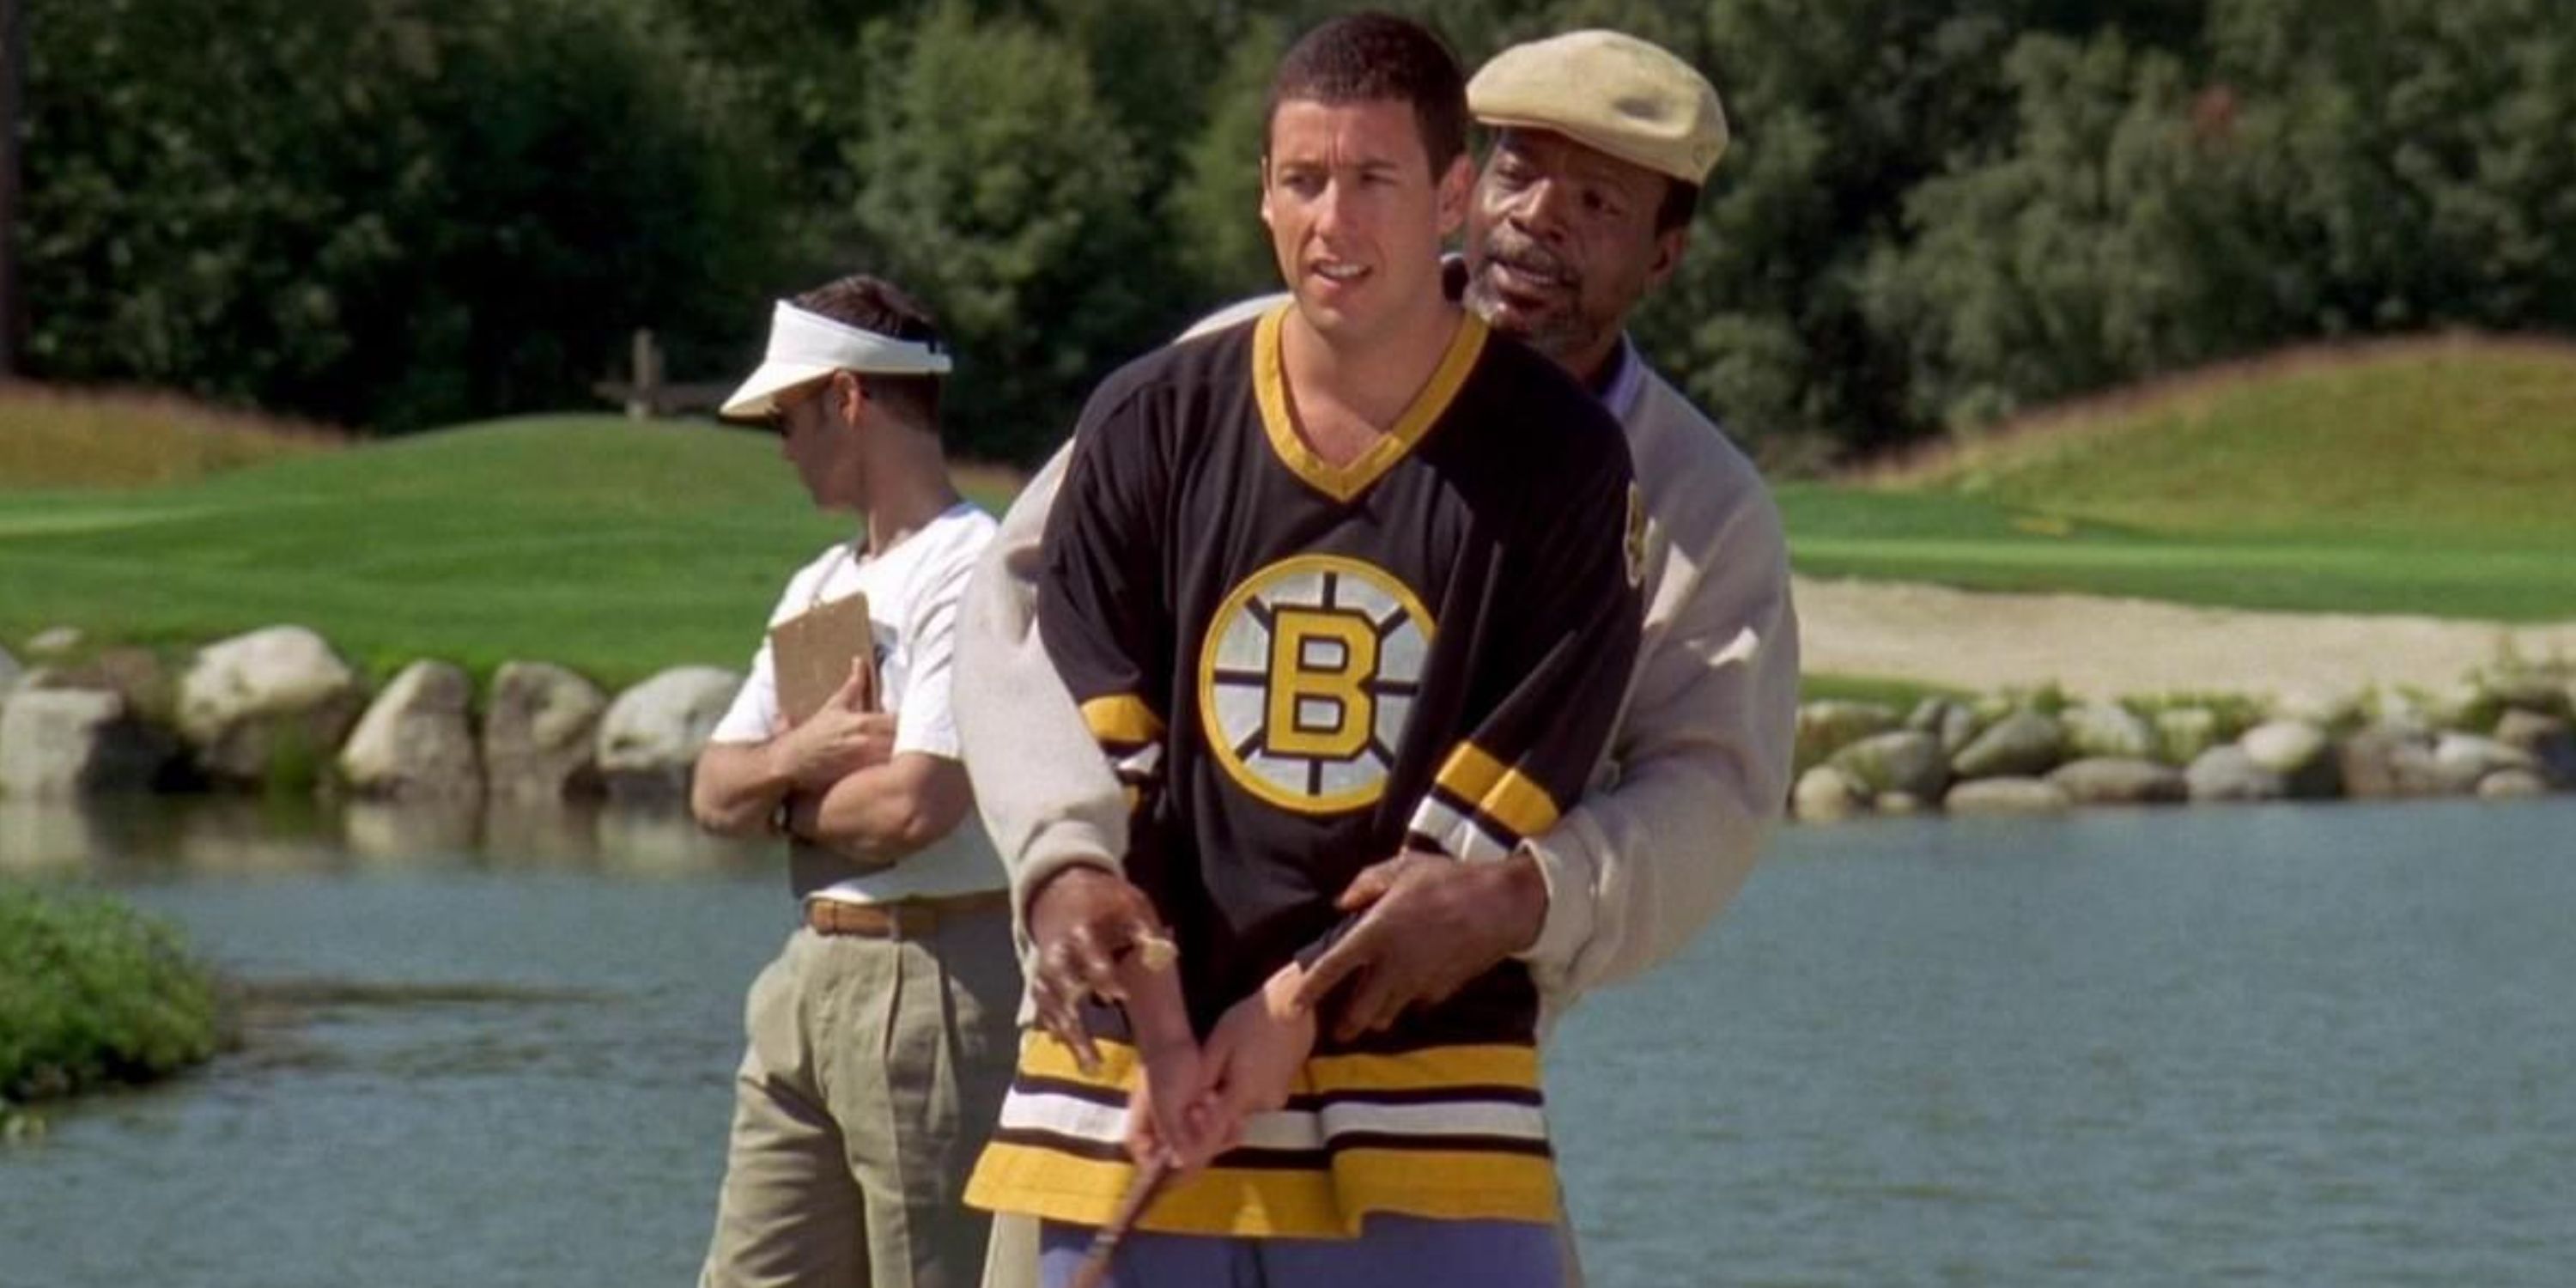 Chubbs behind Happy teaching him how it's all in the hips in Happy Gilmore